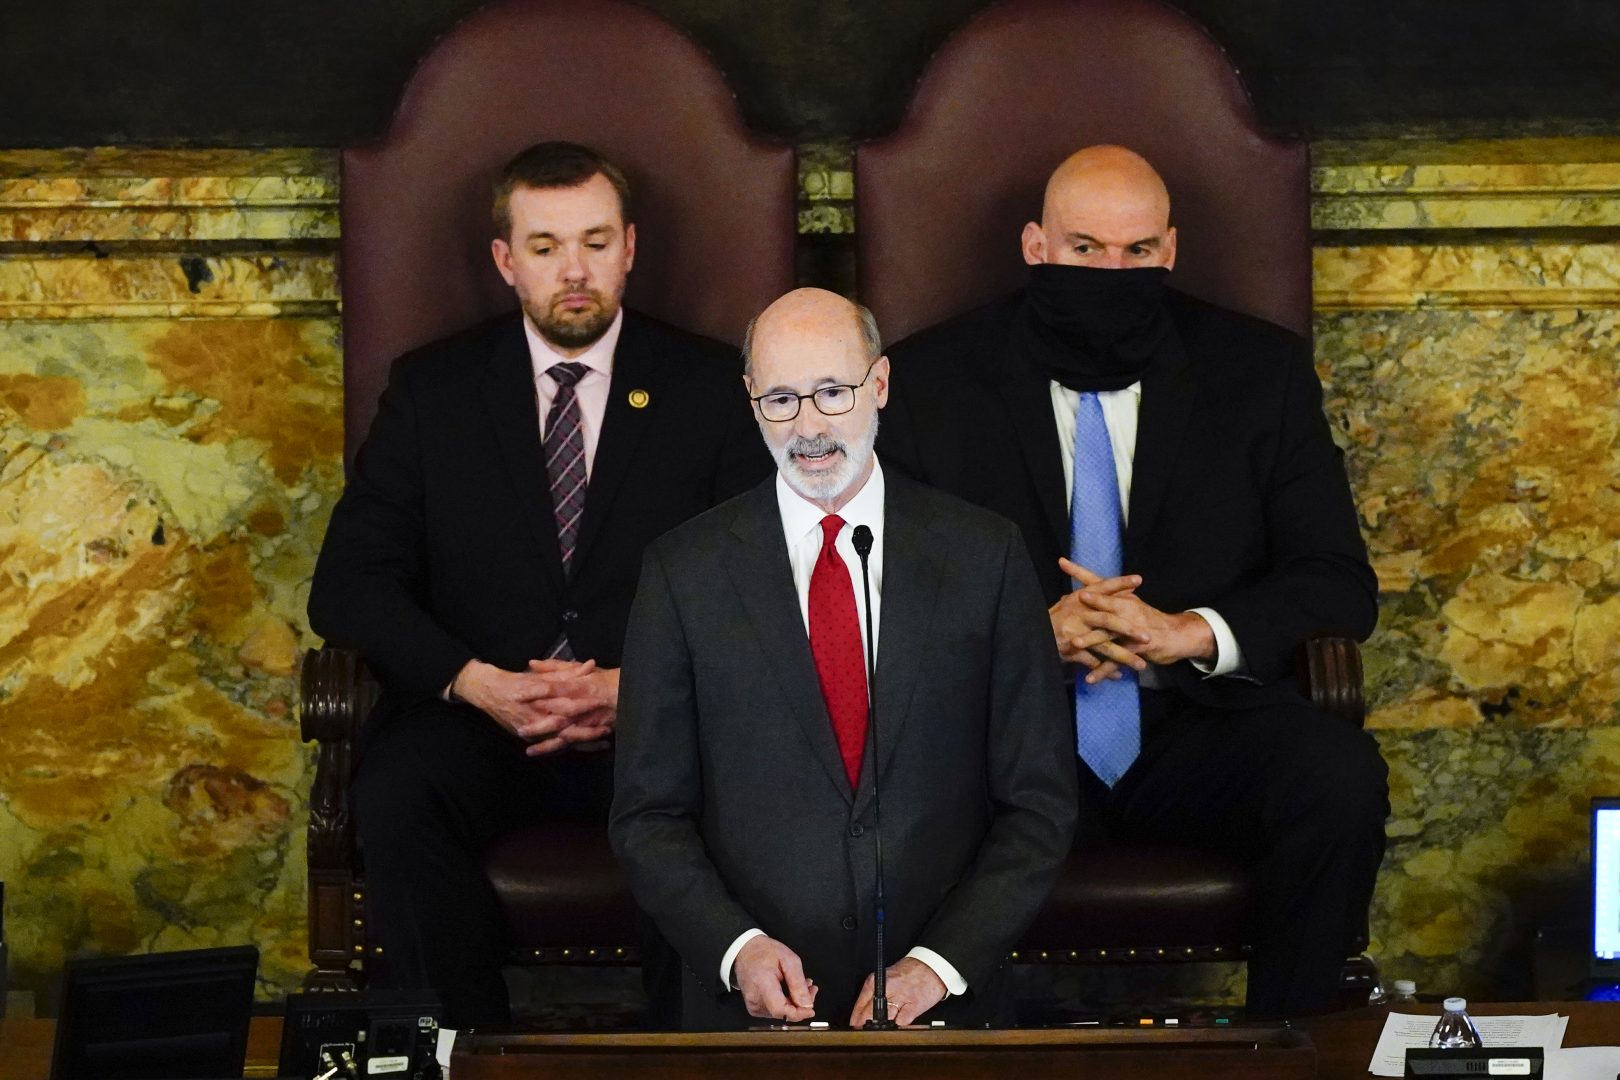 Democratic Gov. Tom Wolf delivers his budget address for the 2022-23 fiscal year to a joint session of the Pennsylvania House and Senate in Harrisburg, Pa., Tuesday, Feb. 8, 2022. Wolf is accompanied by House Speaker Bryan Cutler, R-Lancaster, left, and Lt. Gov. John Fetterman.